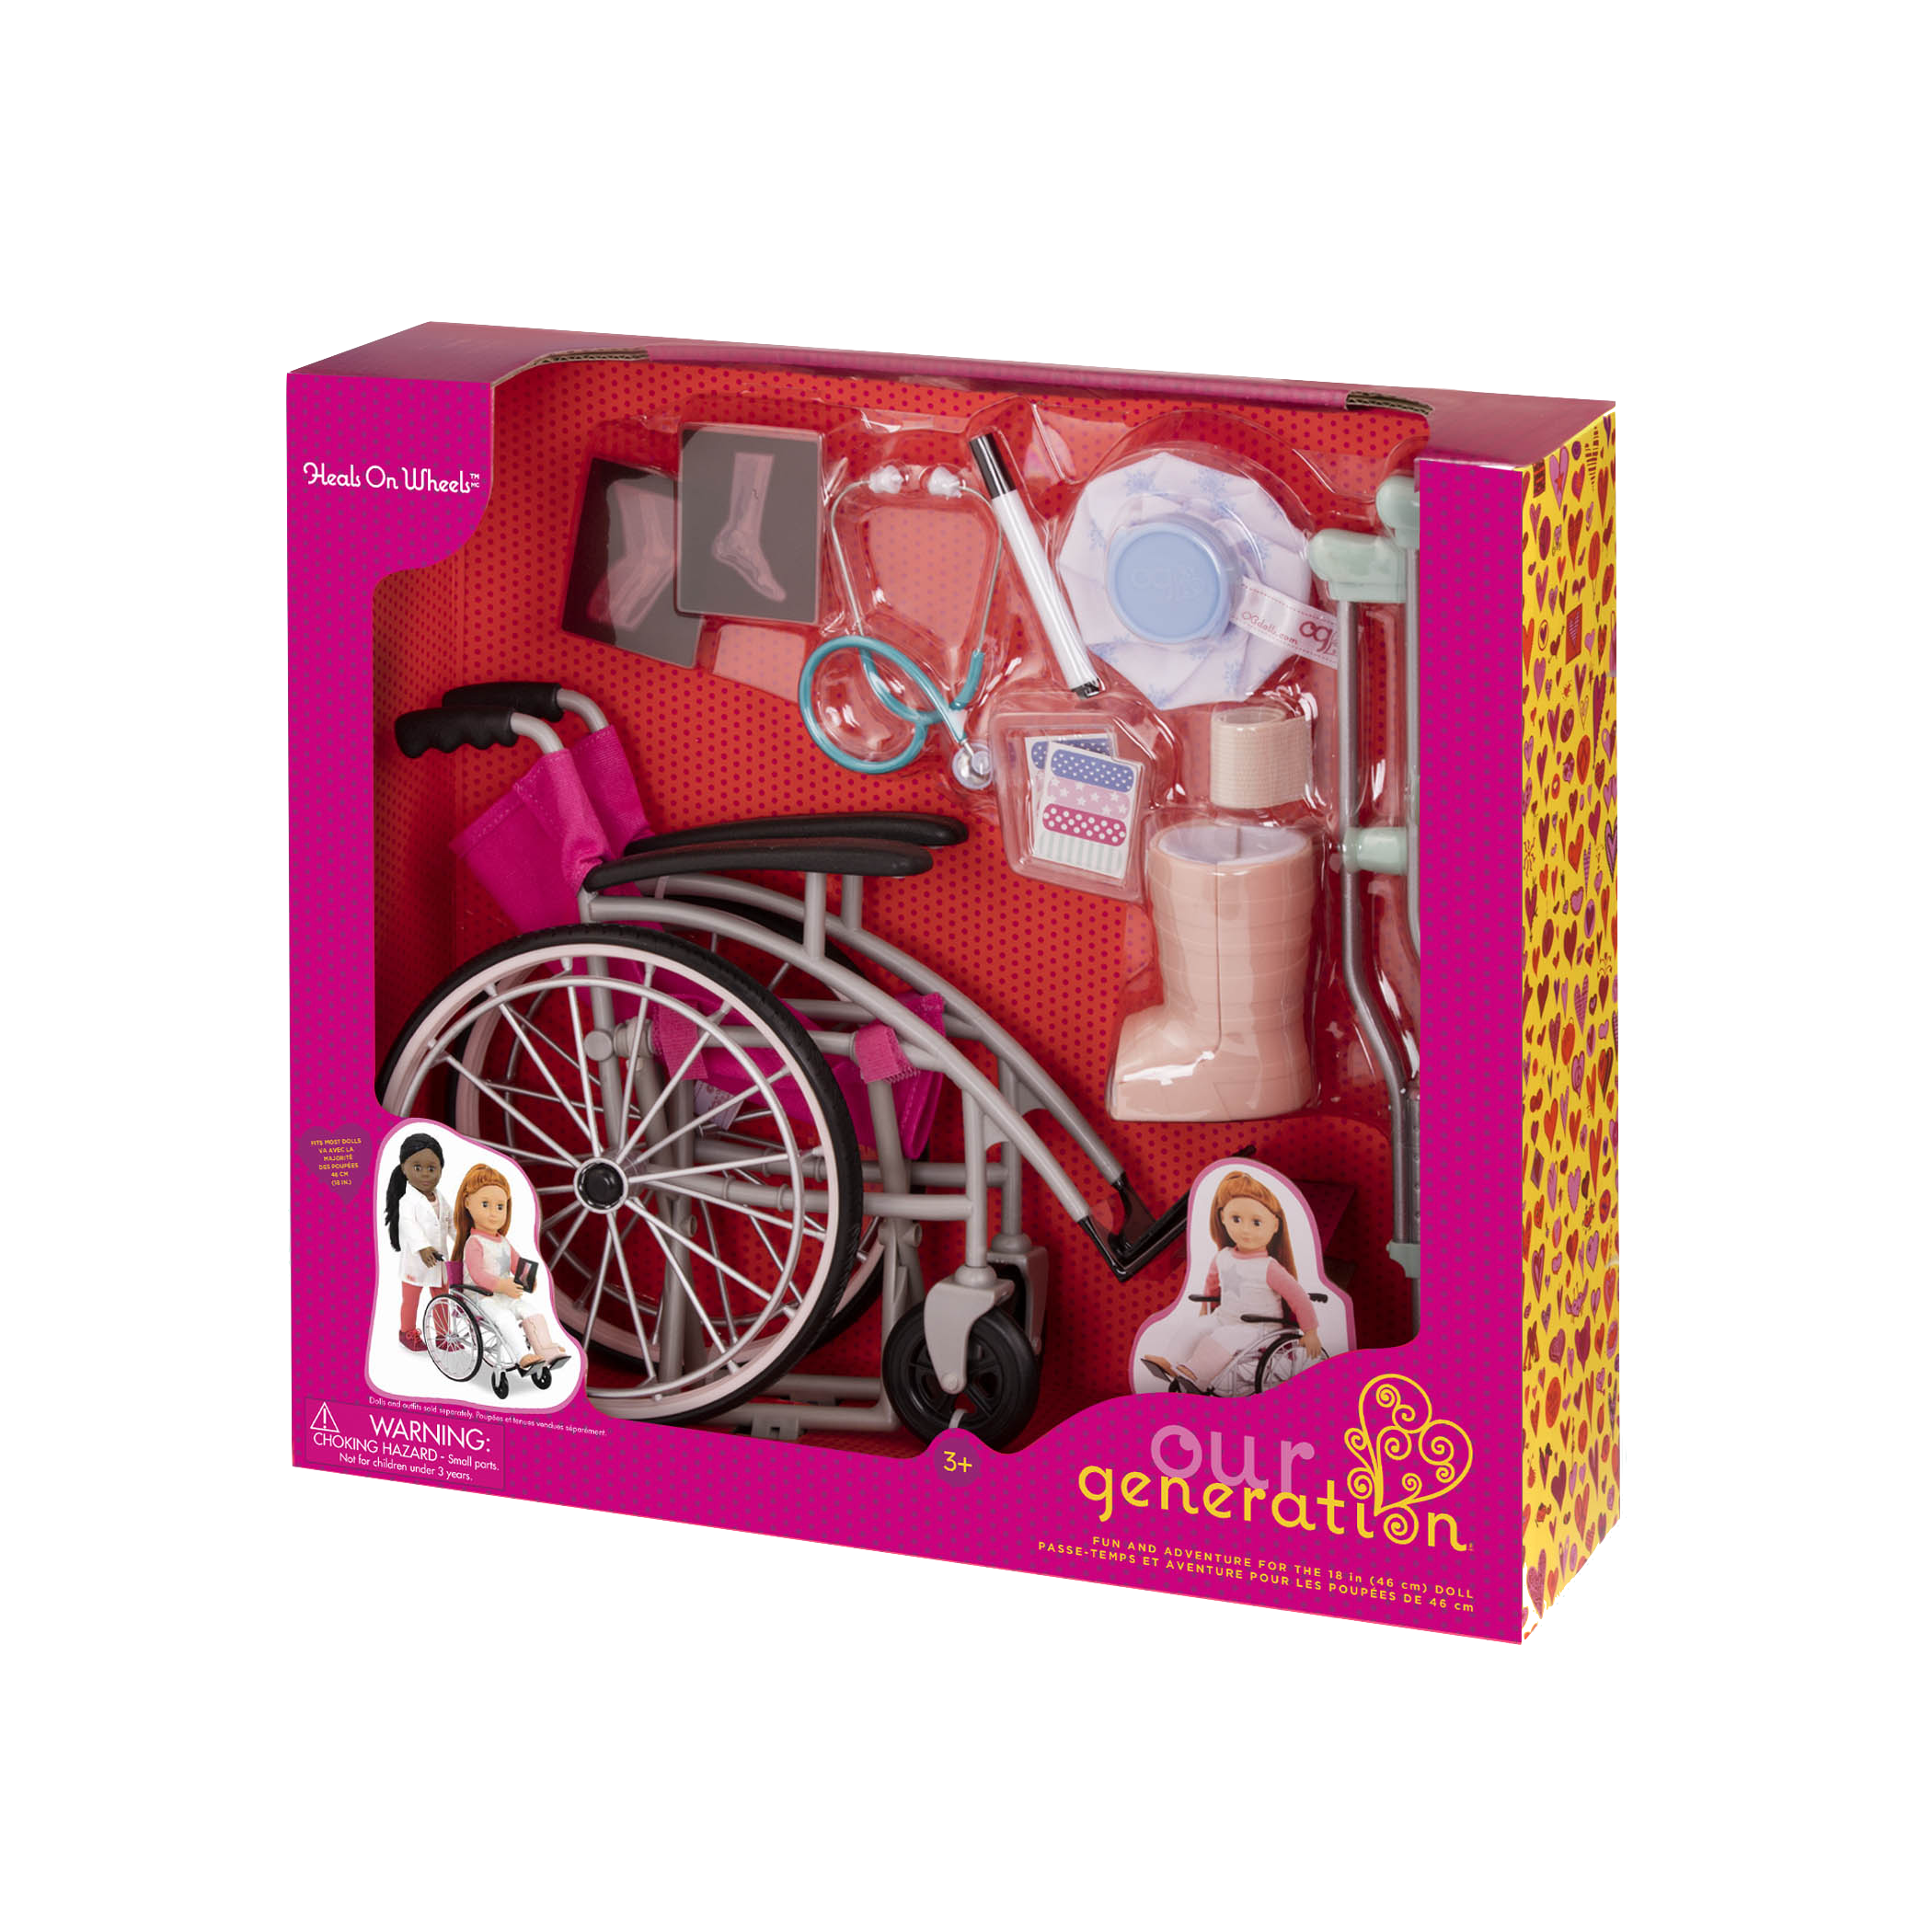 Heals on Wheels medical Accessories package